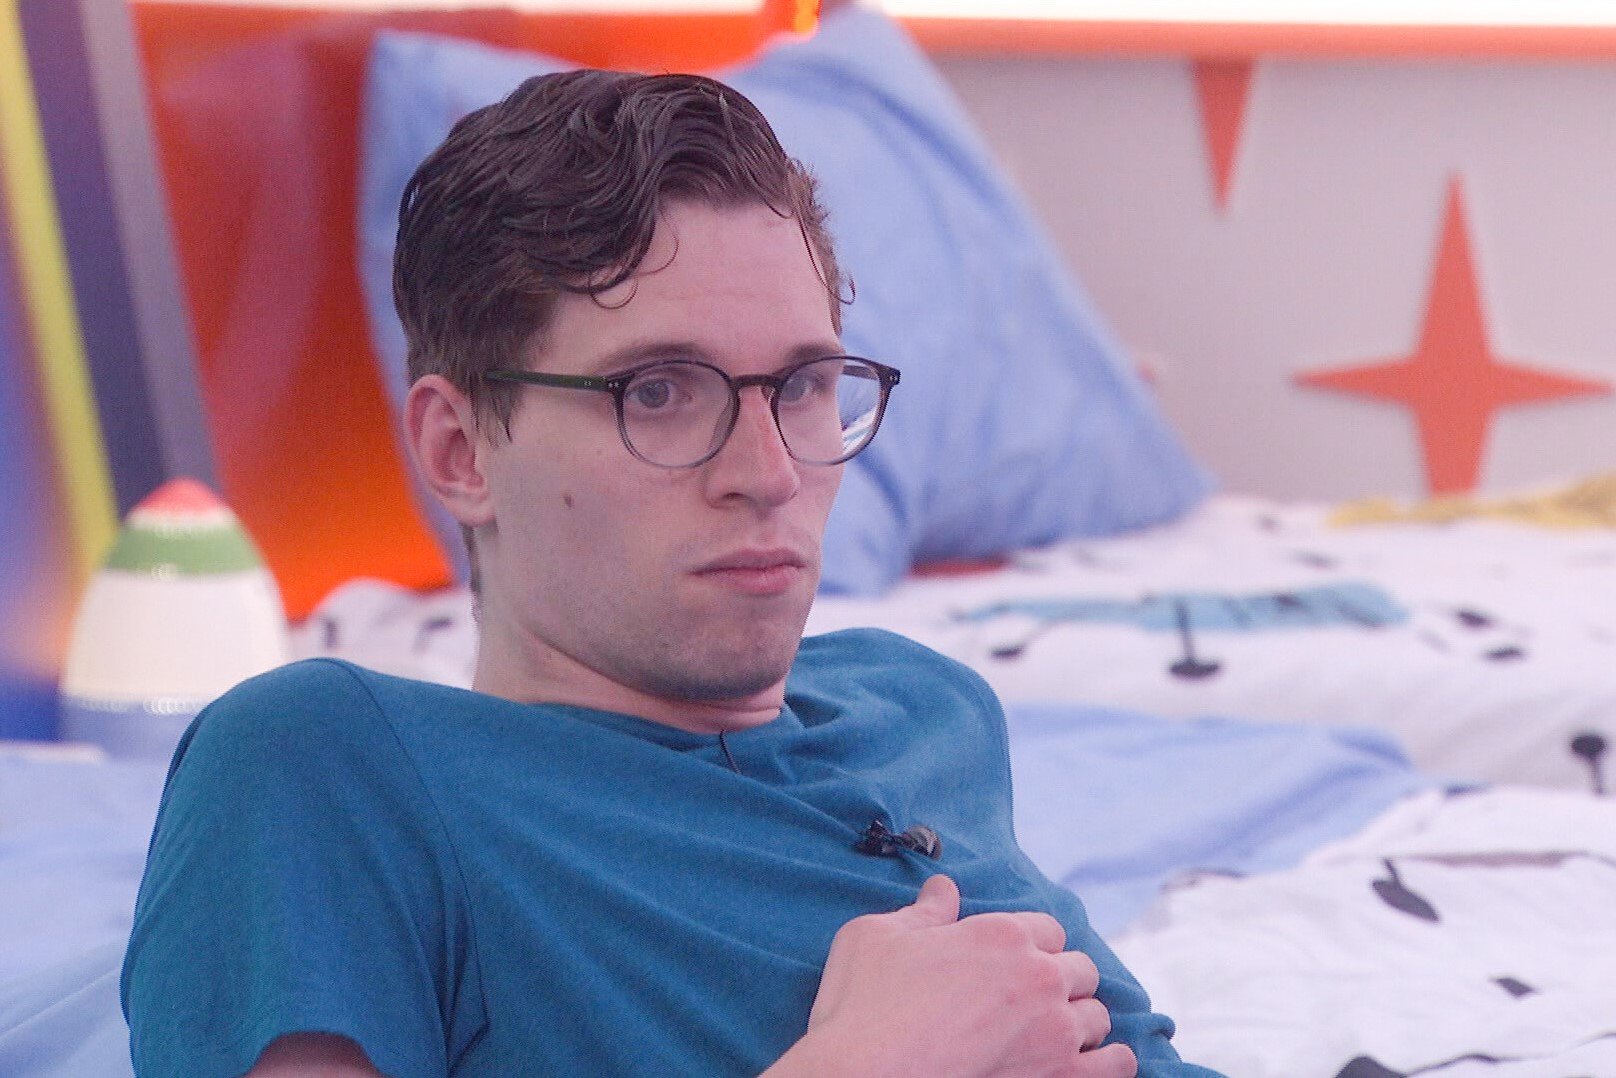 Michael Bruner, a houseguest in 'Big Brother 24' on CBS, wears a blue shirt.